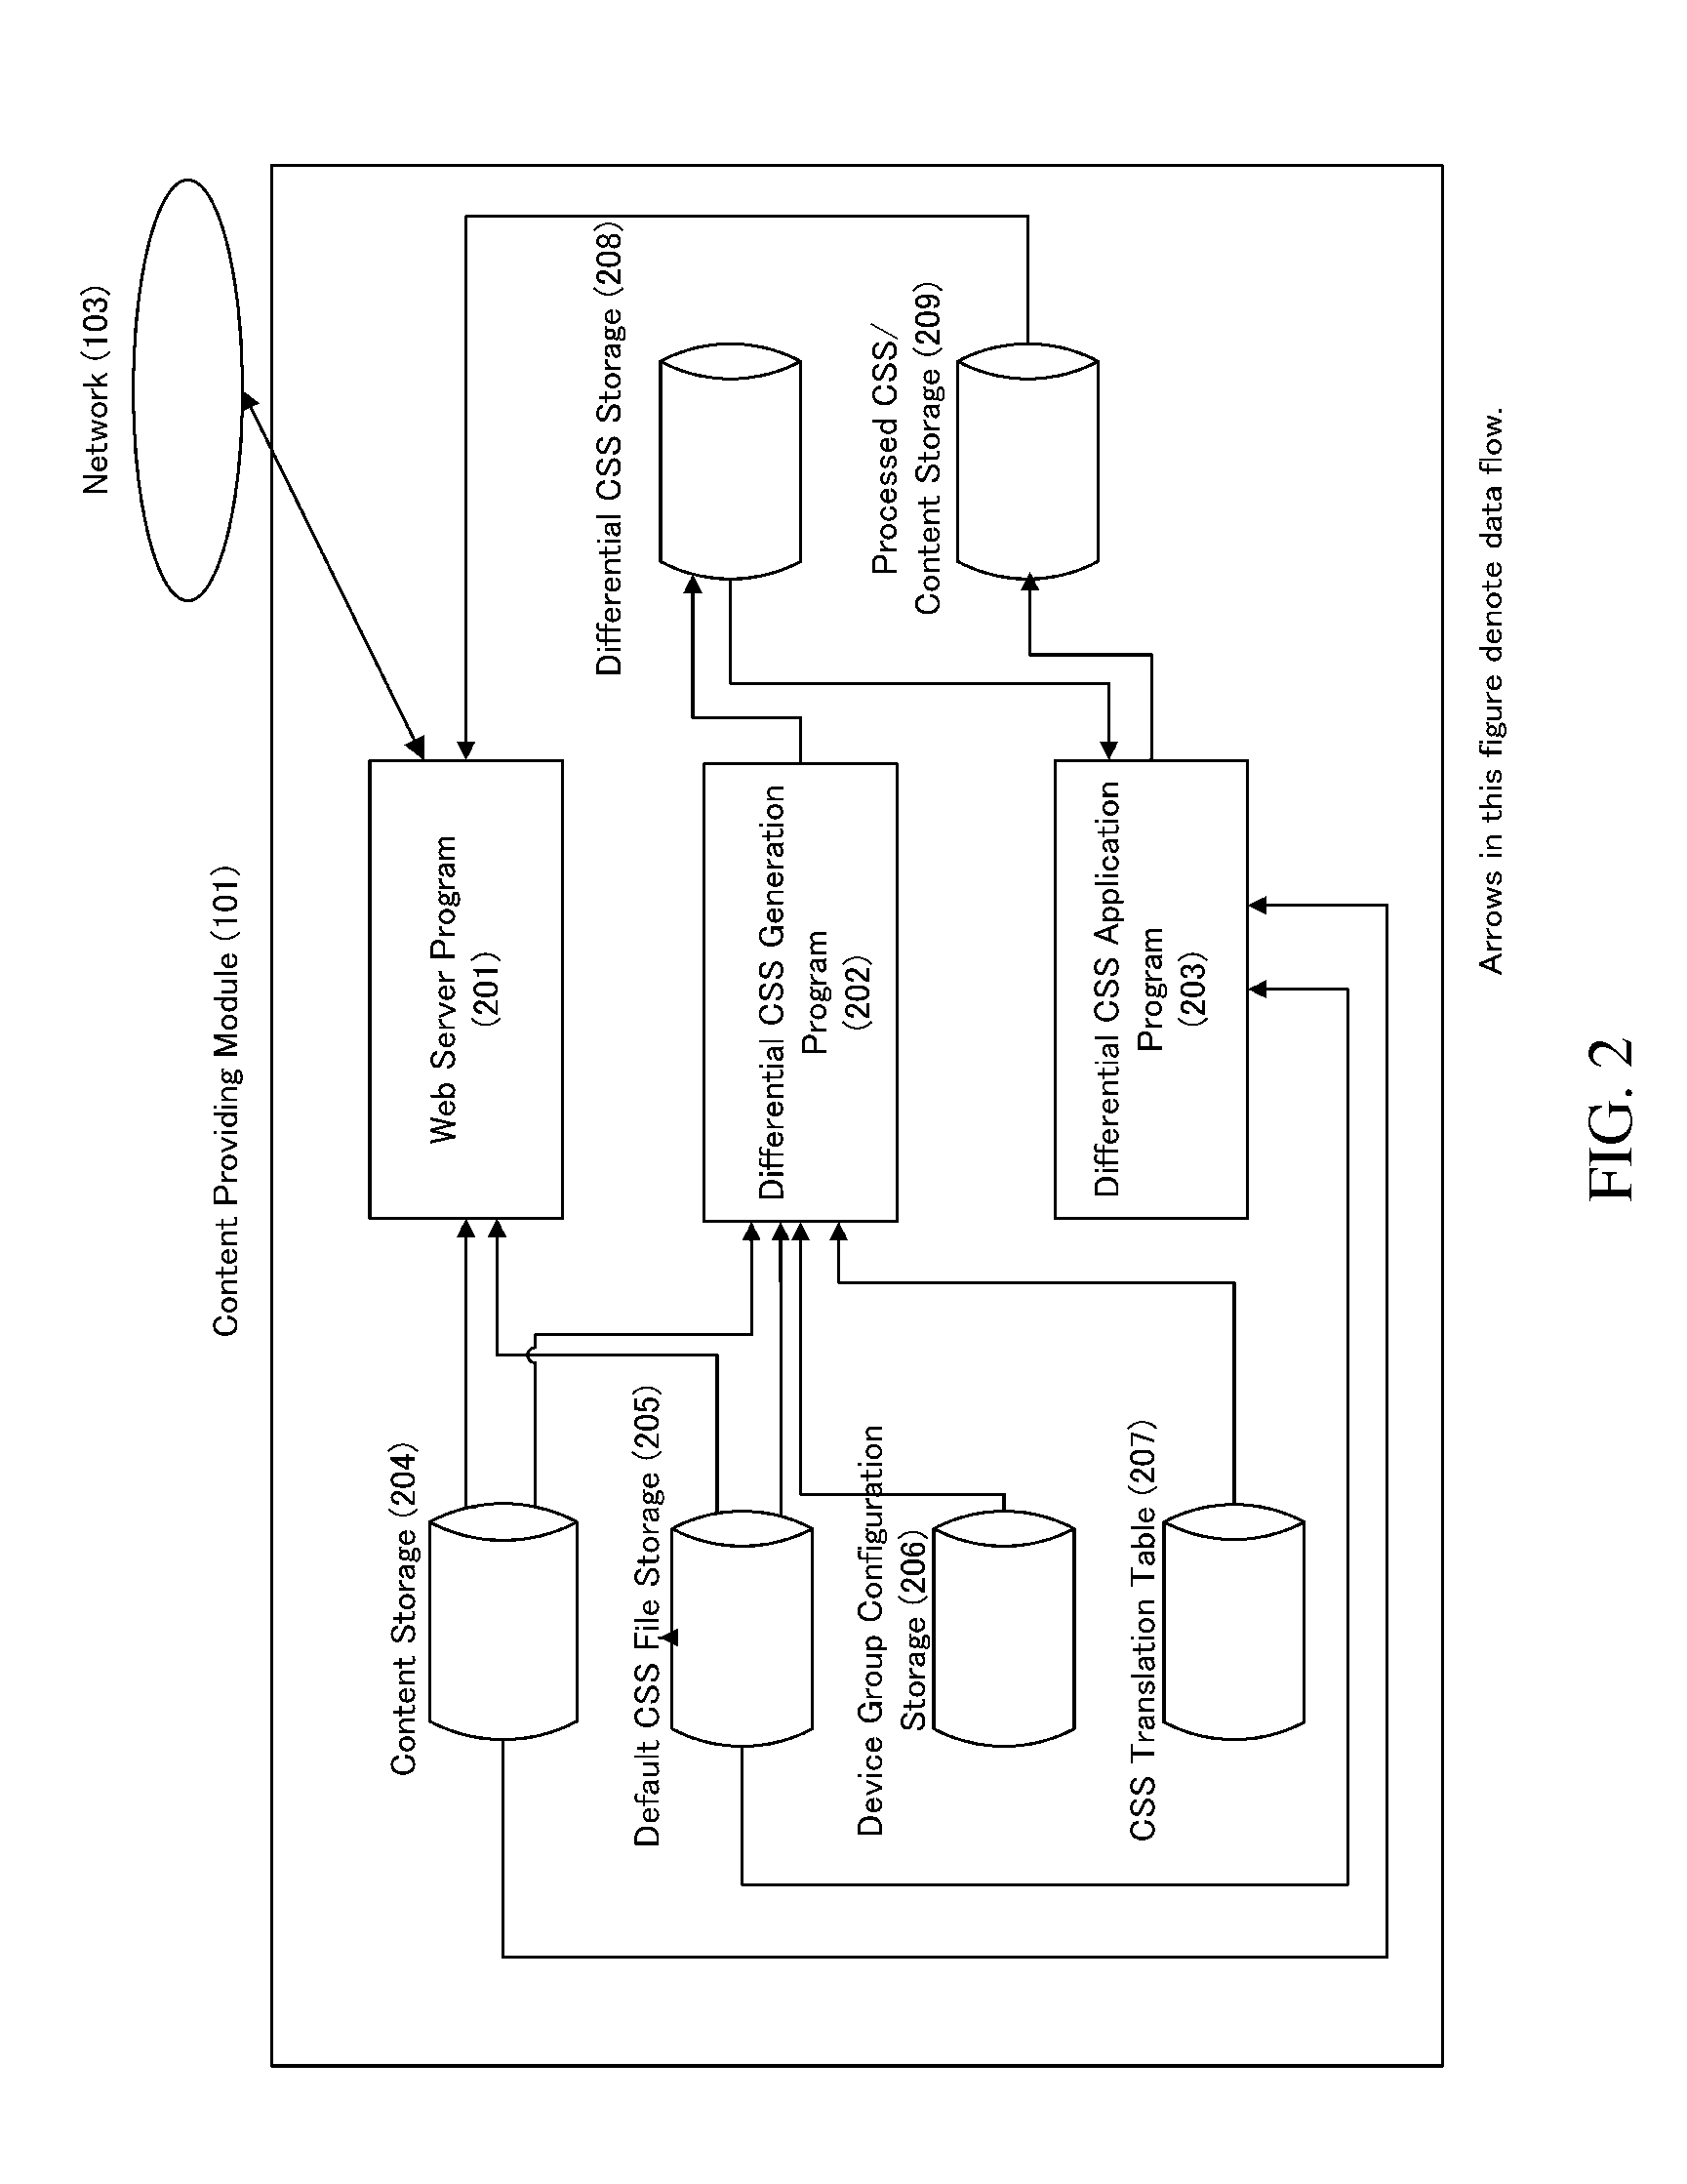 Content providing apparatus compatible with various terminal devices